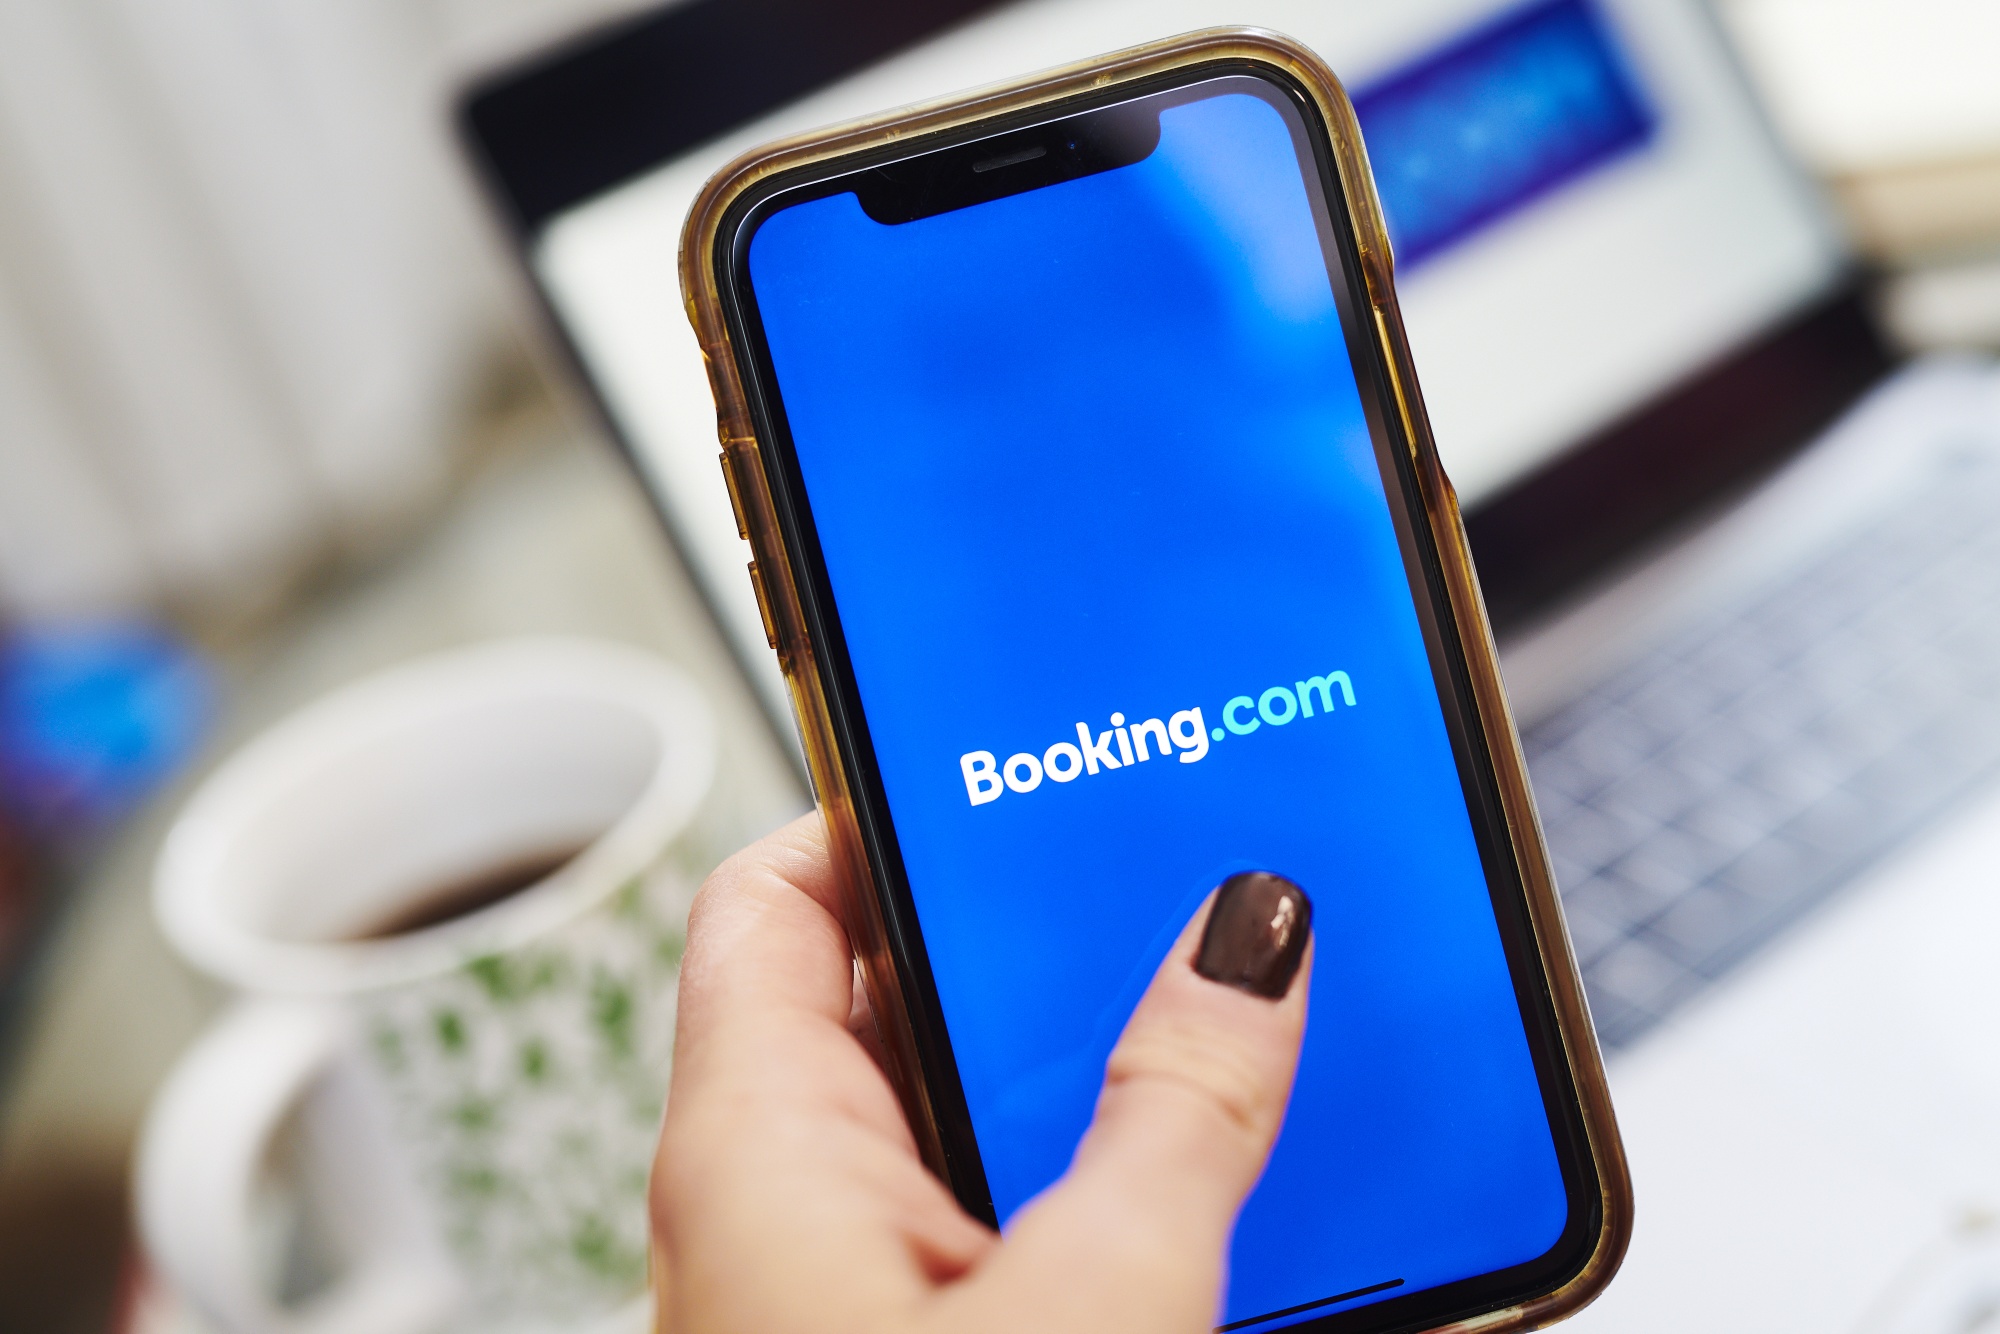 Booking has six months to make sure it complies with a raft of preemptive measures under the EU’s flagship Digital Markets Act.